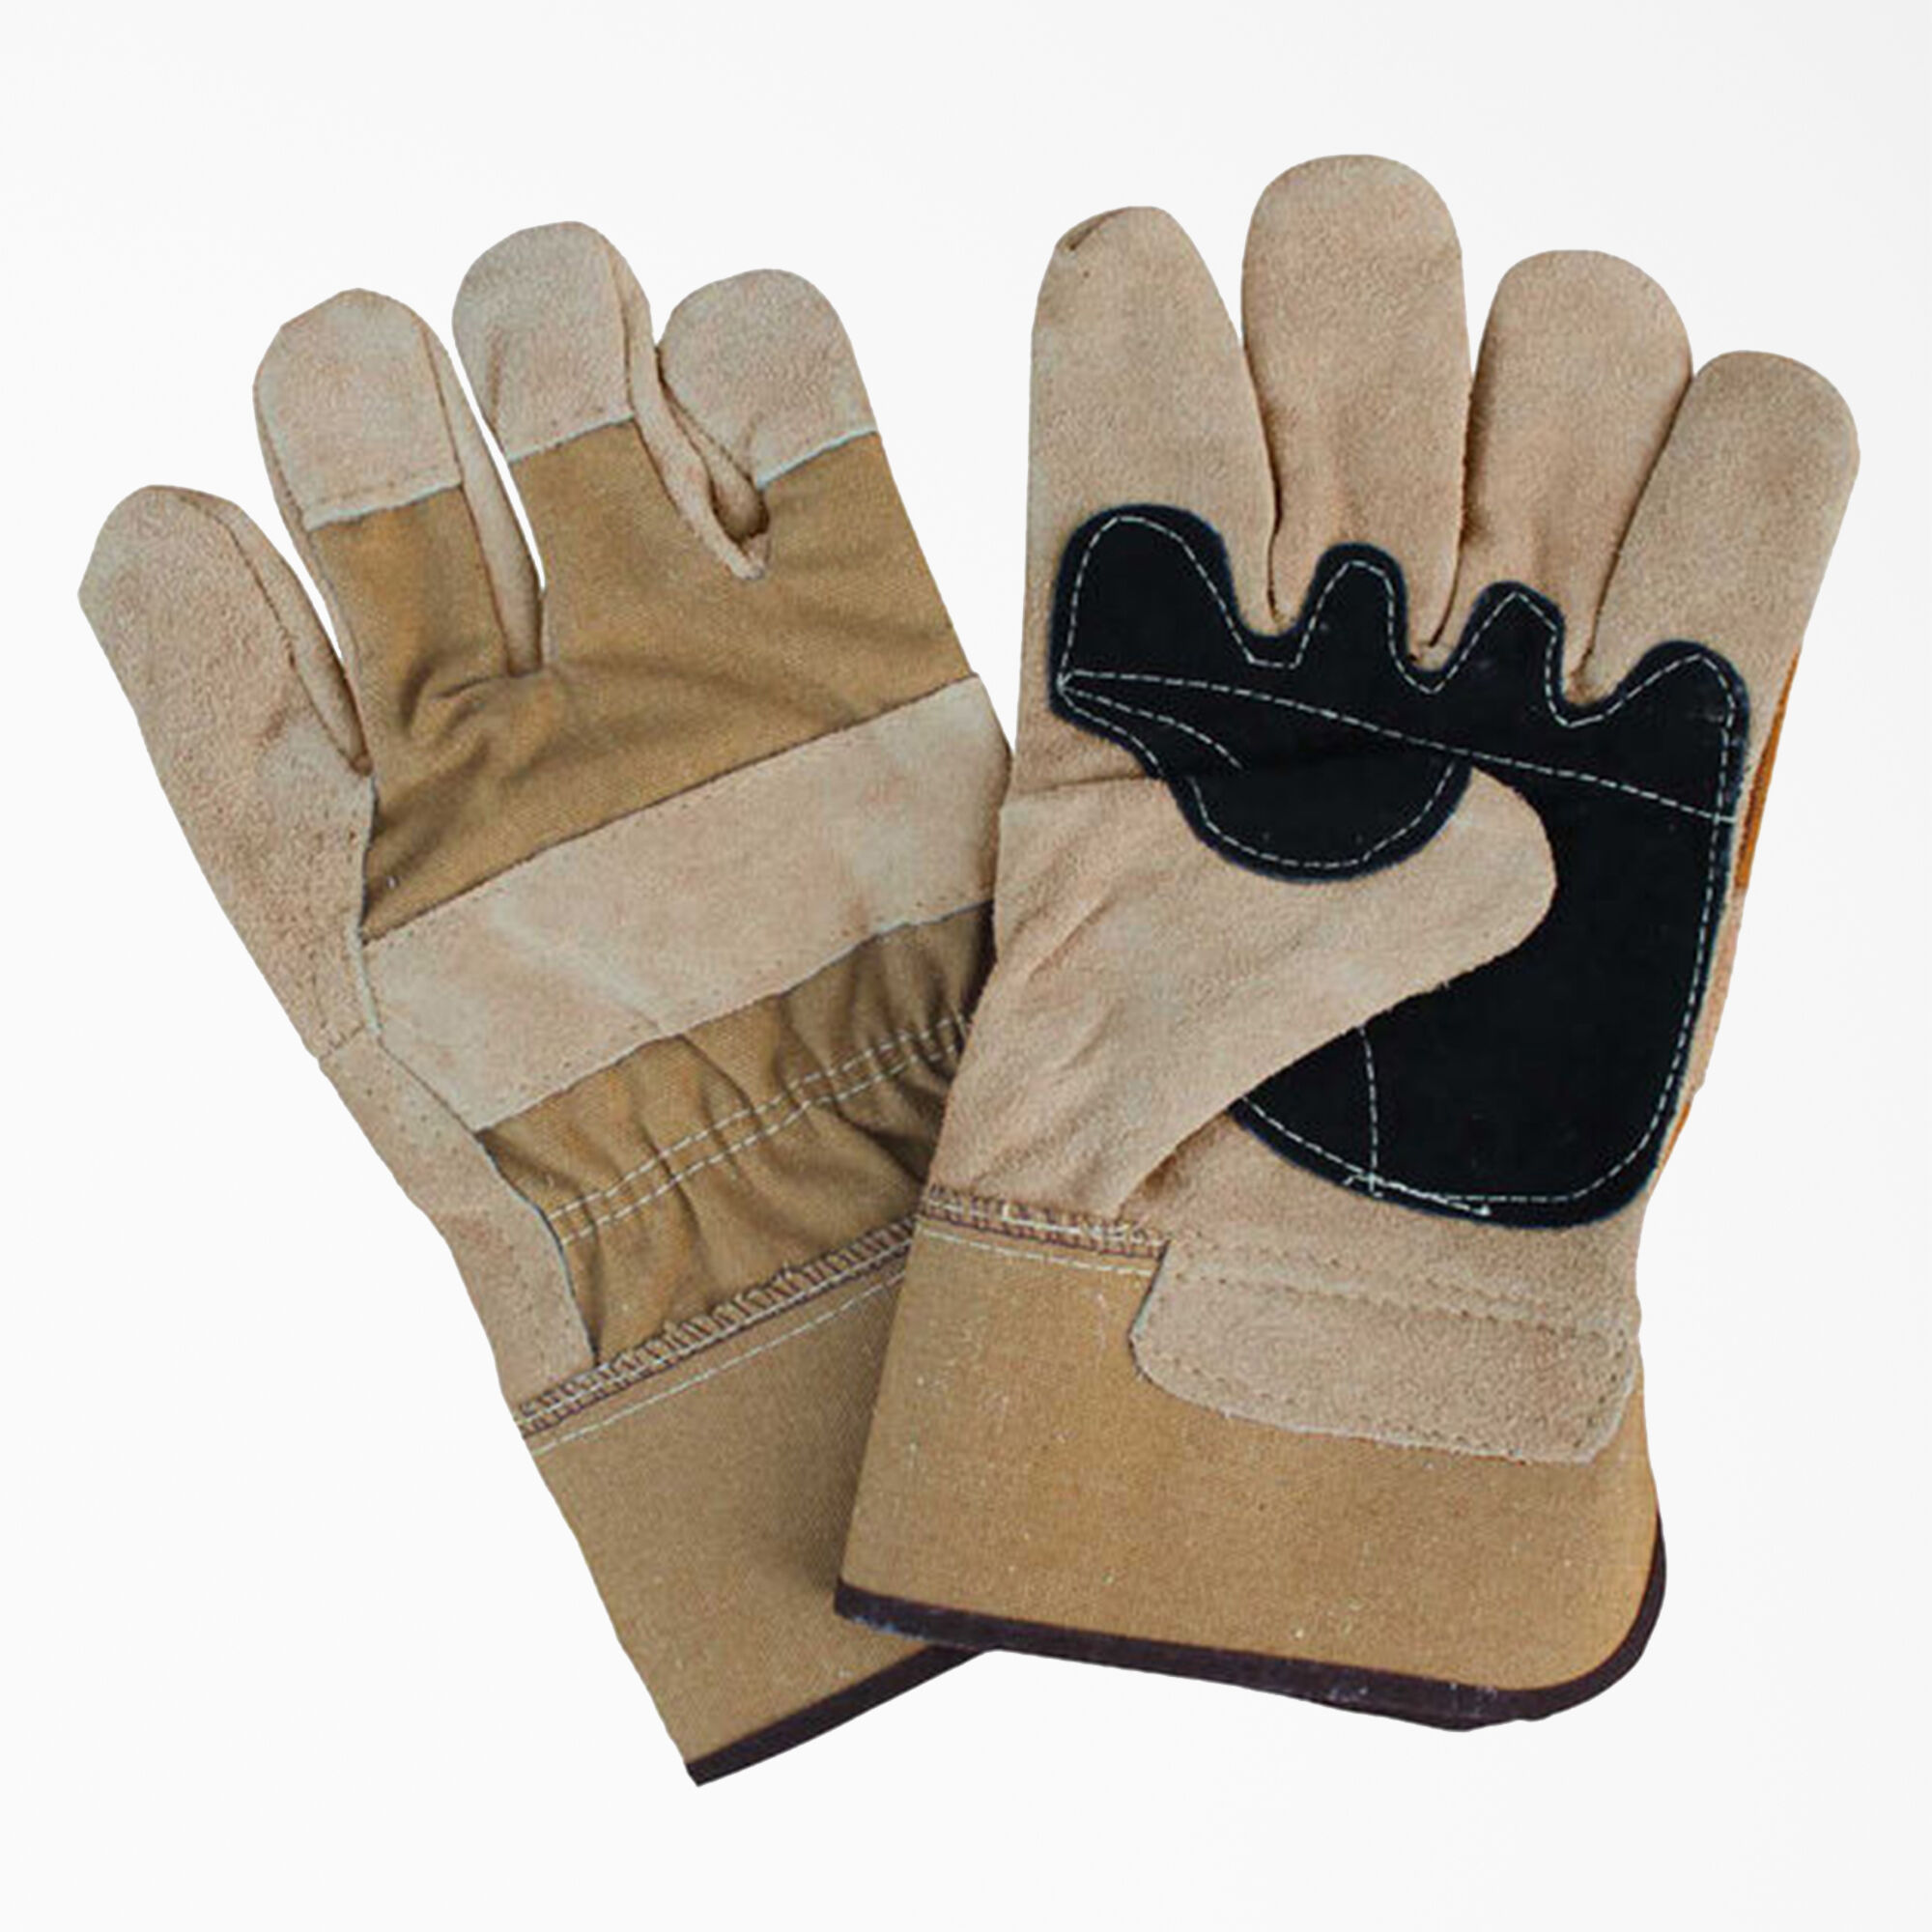 DICKIES KONG HEAVY DUTY BUILDERS CONSTRUCTION GARDENING THINSULATE LINED GLOVES 